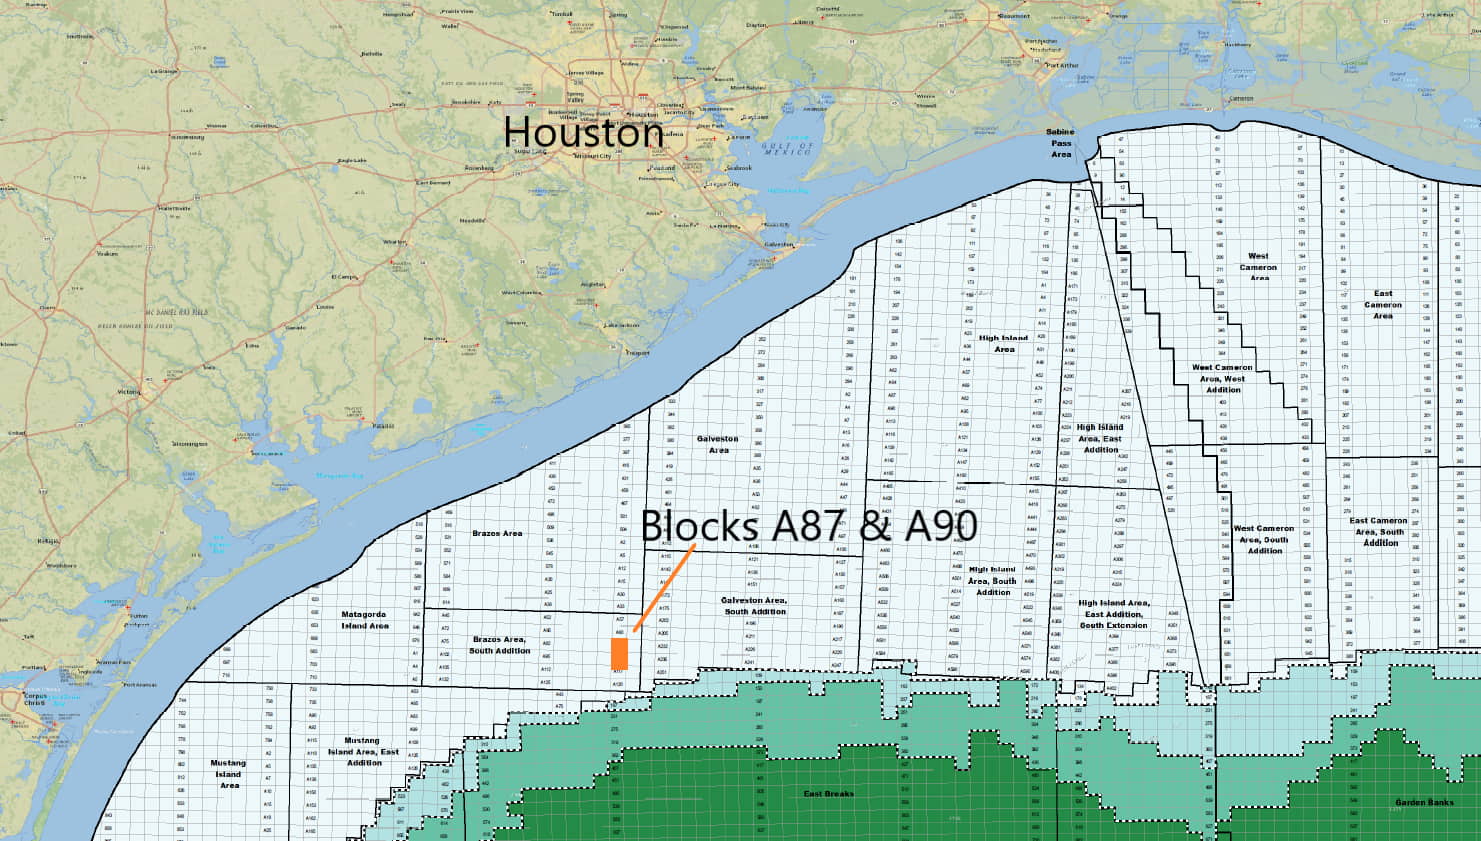 Big Apple location map –Brazos Area, South Addition Blocks A87 &A90 approximately 200 km South of Houston; Source: Prominence Energy